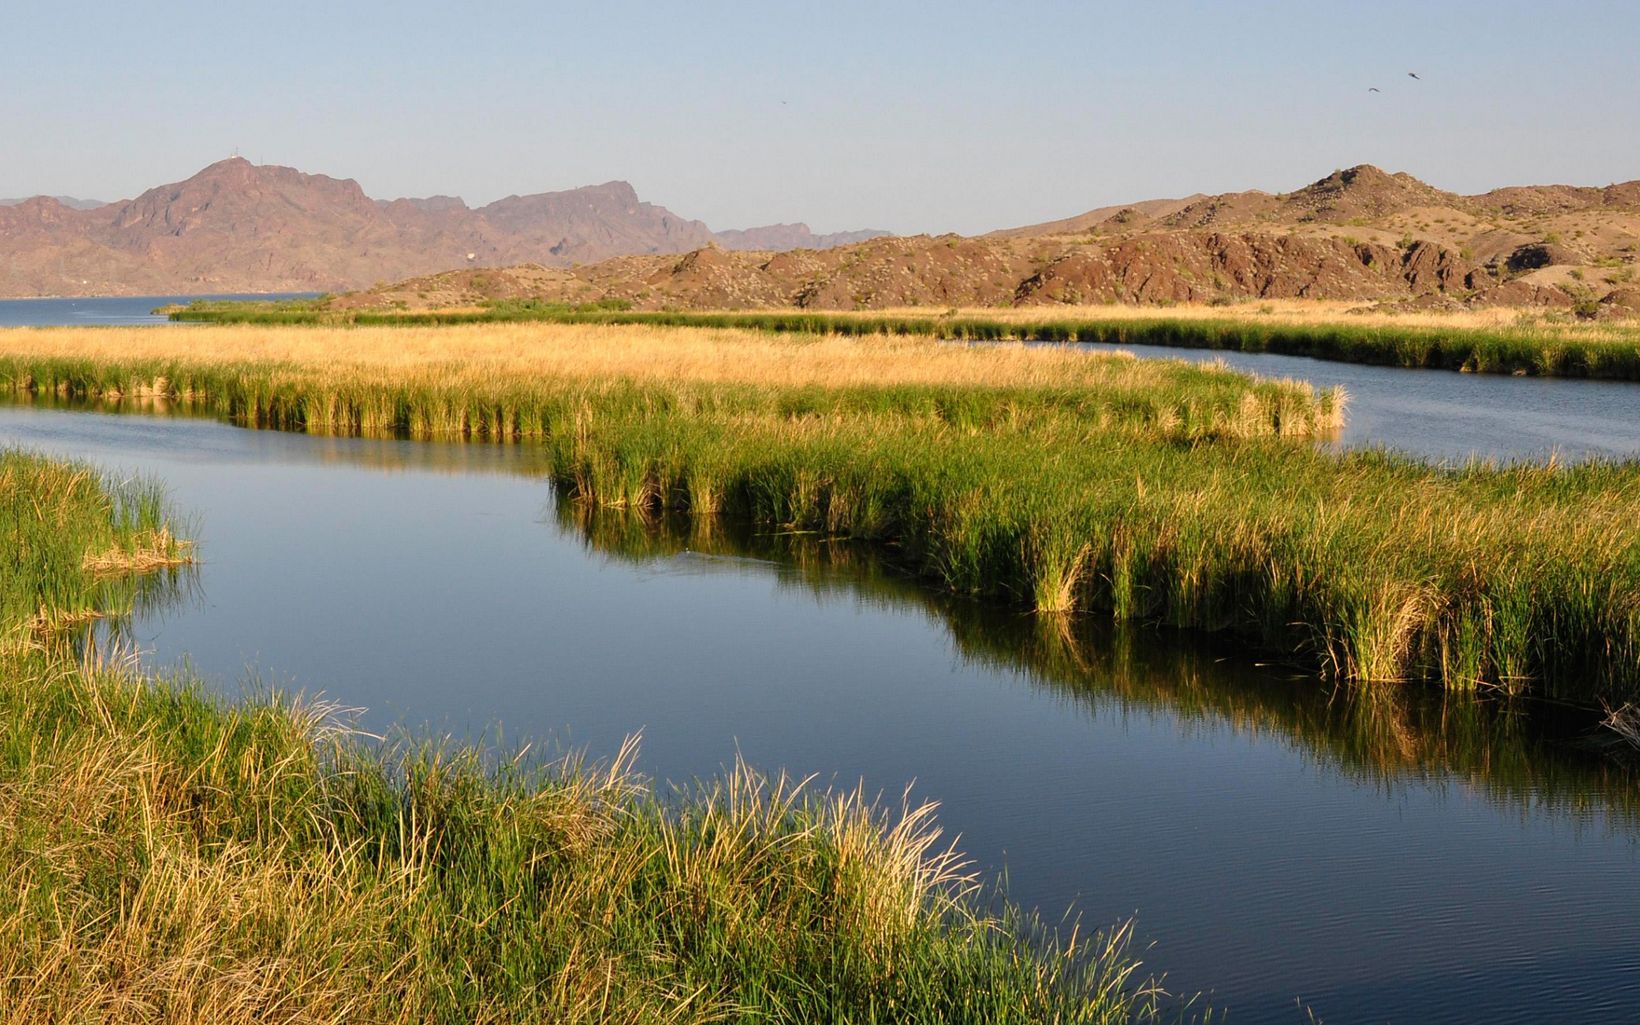 Bill Williams River In the Arizona desert, the Bill Williams River brings great diversity of plants and wildlife. © Tana Kappel/The Nature Conservancy